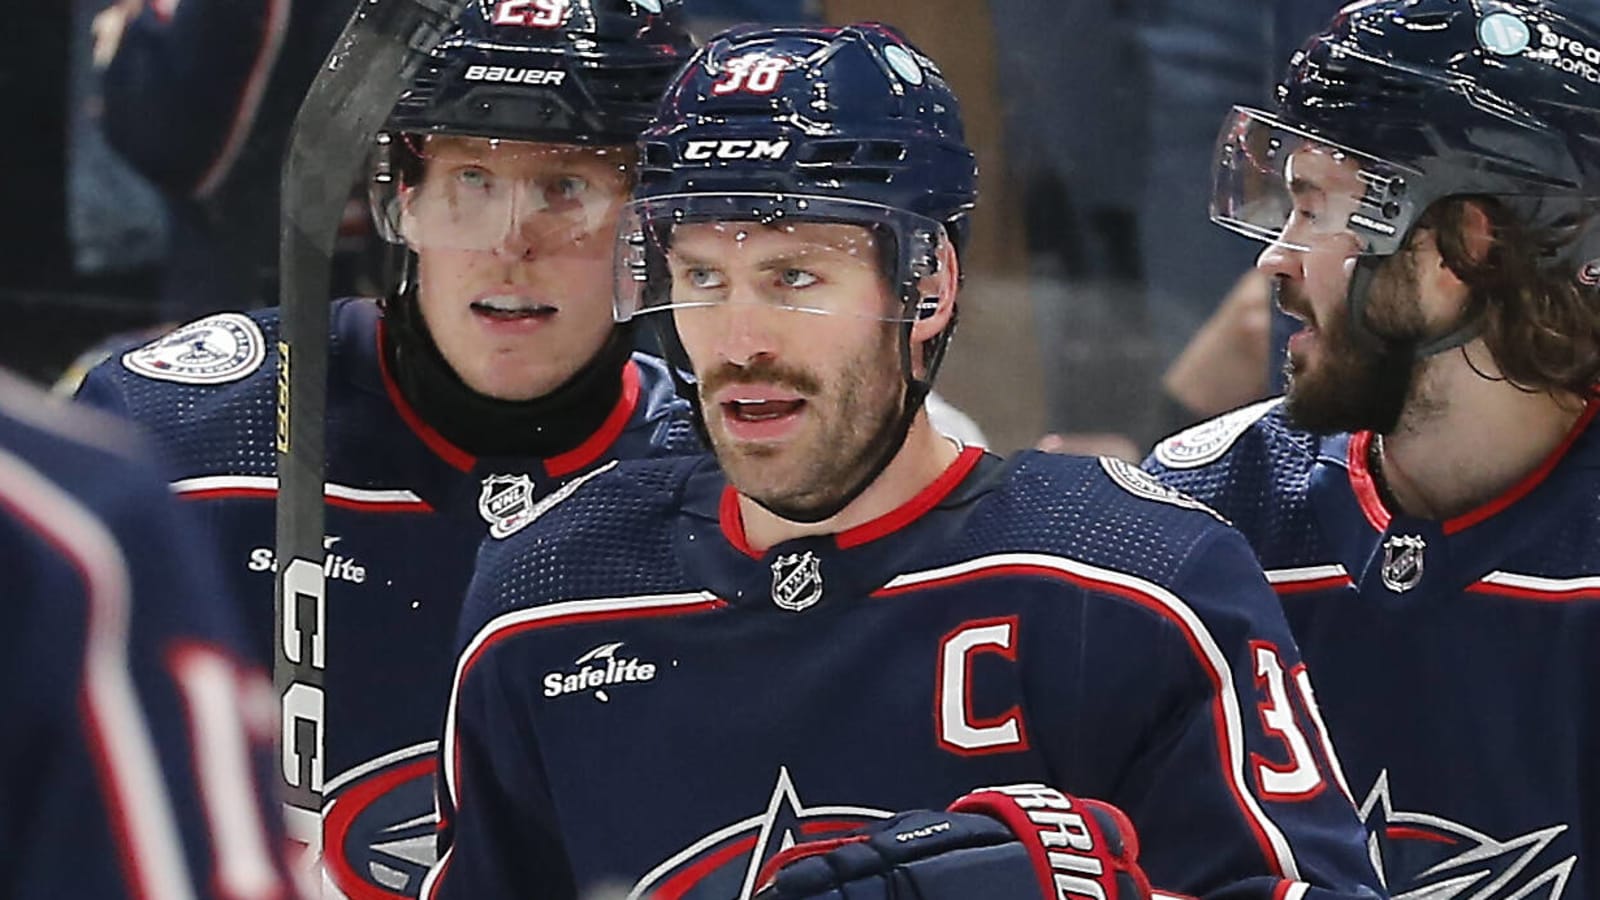 Blue Jackets not looking to trade captain ahead of deadline